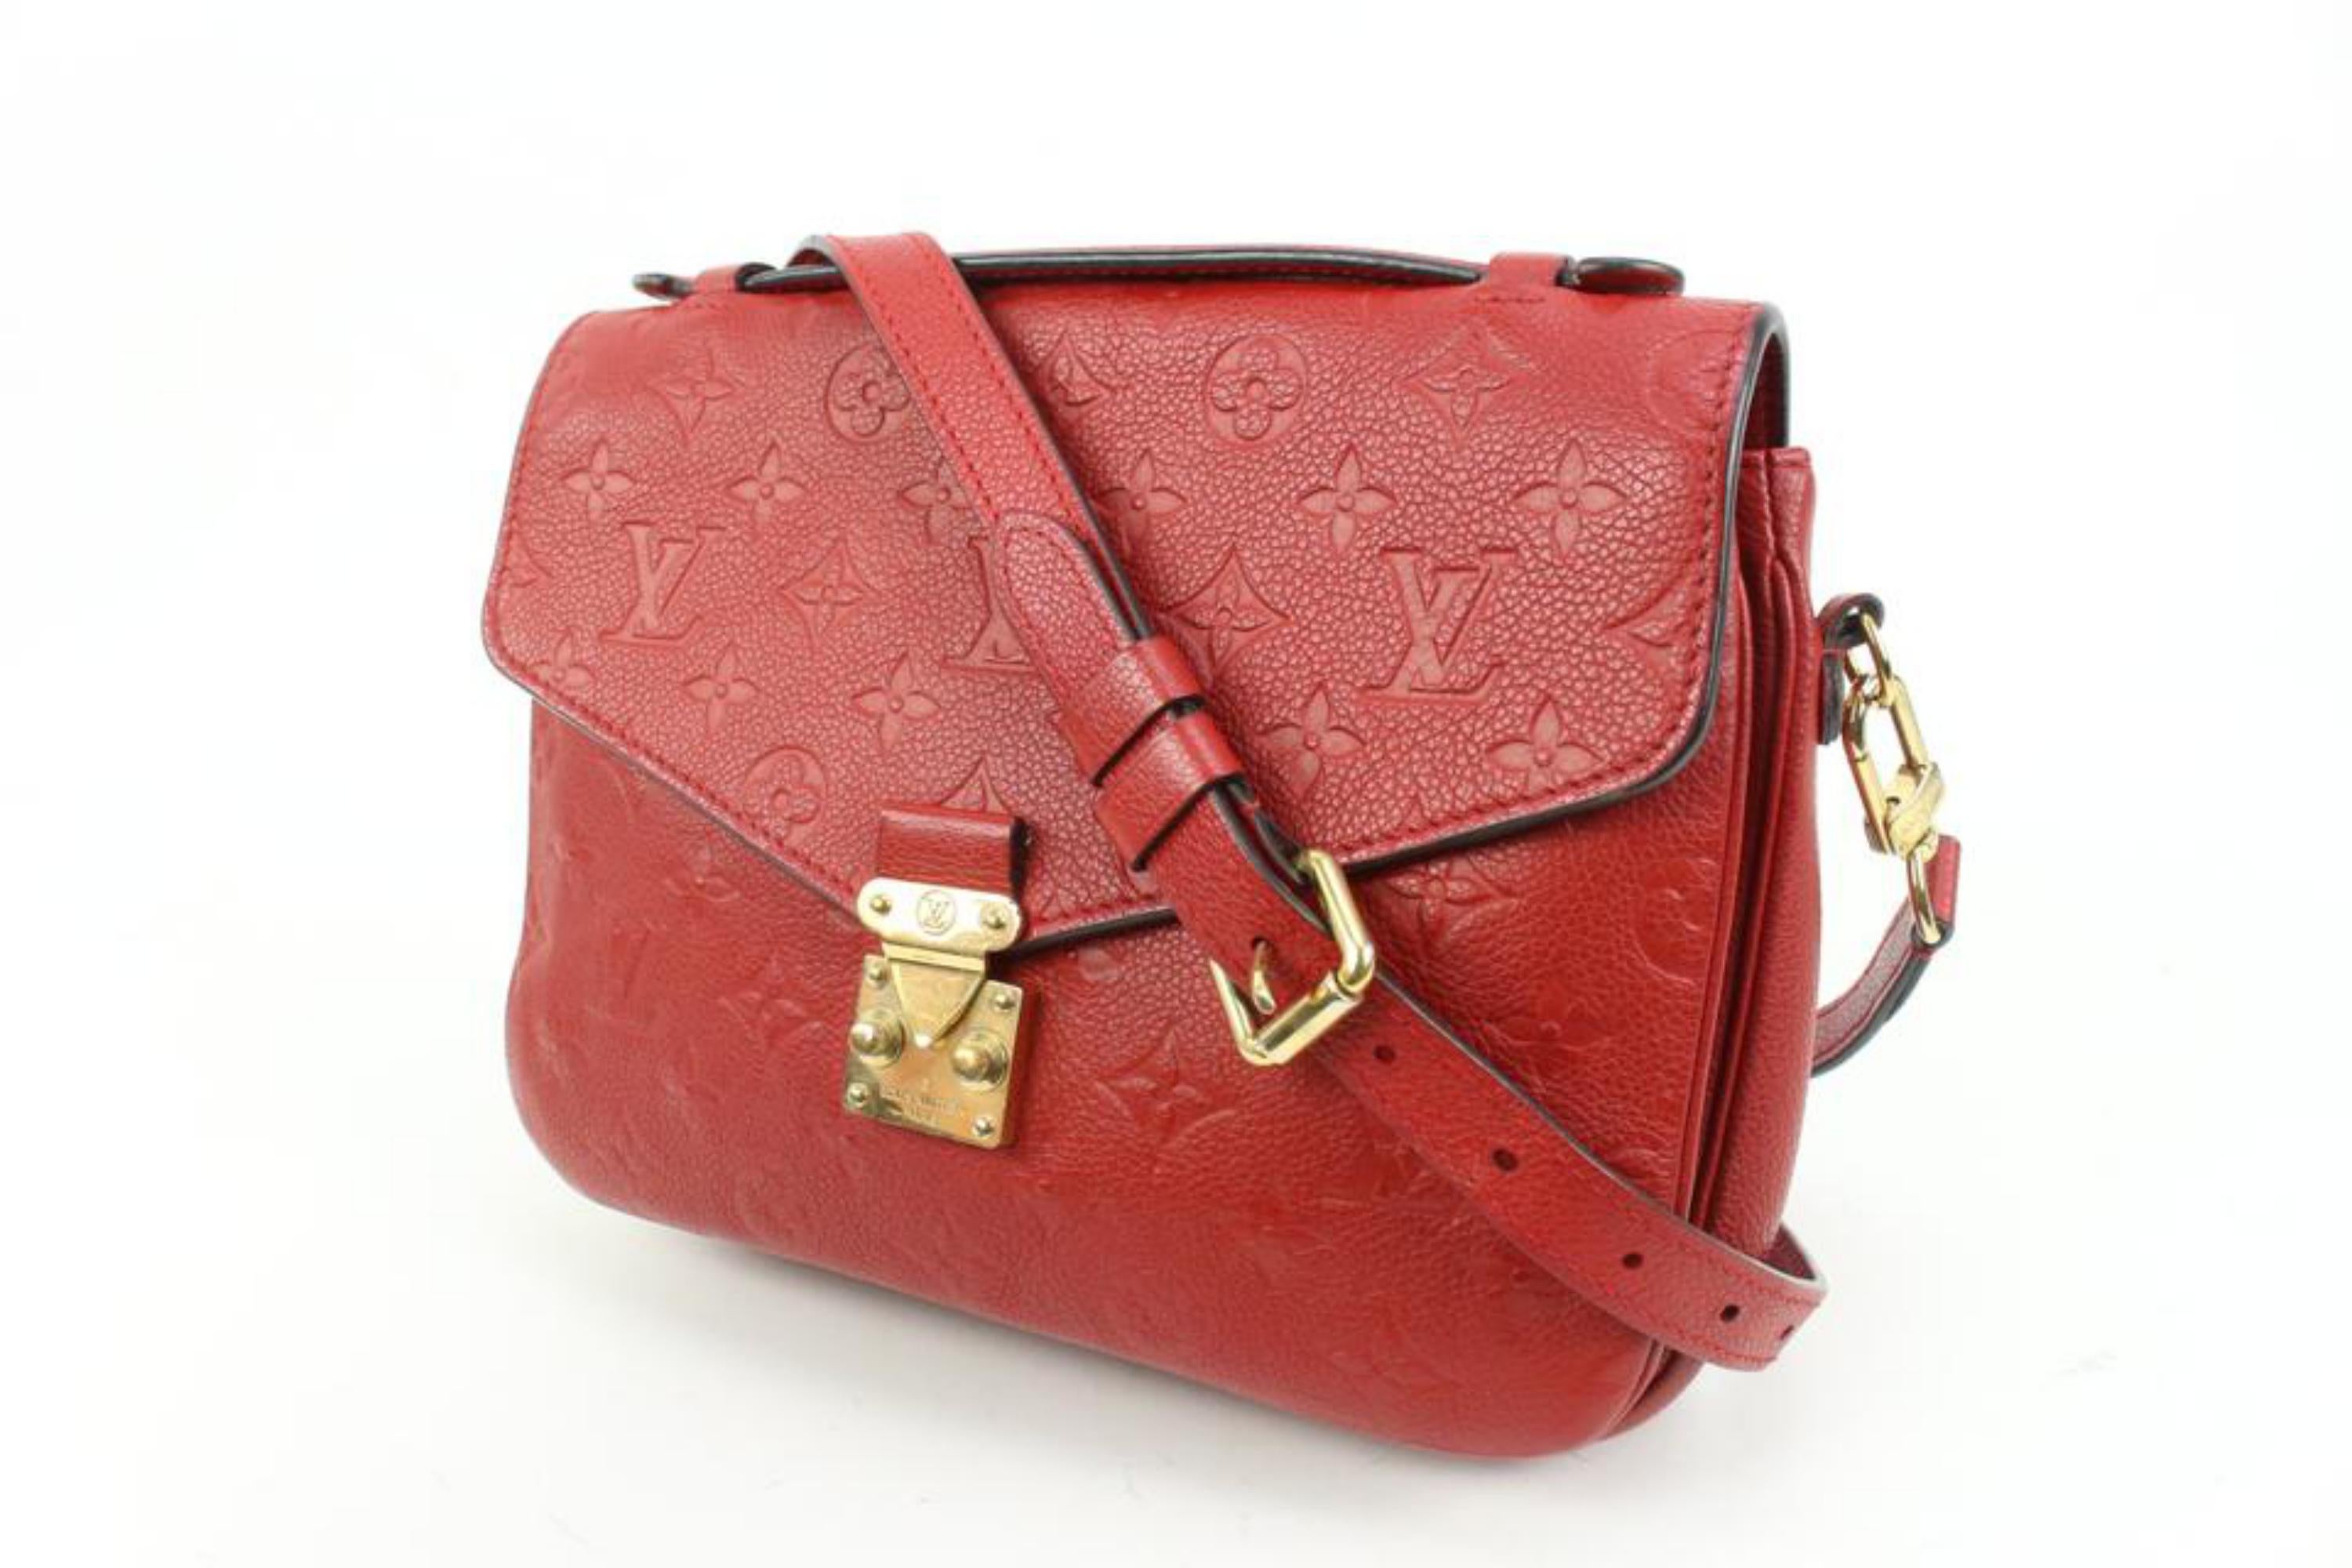 Louis Vuitton Red Monogram Leather Empreinte Pochette Metis Crossbody Bag 41lk78
Date Code/Serial Number: SD2157
Made In: U.S.A
Measurements: Length:  9.5